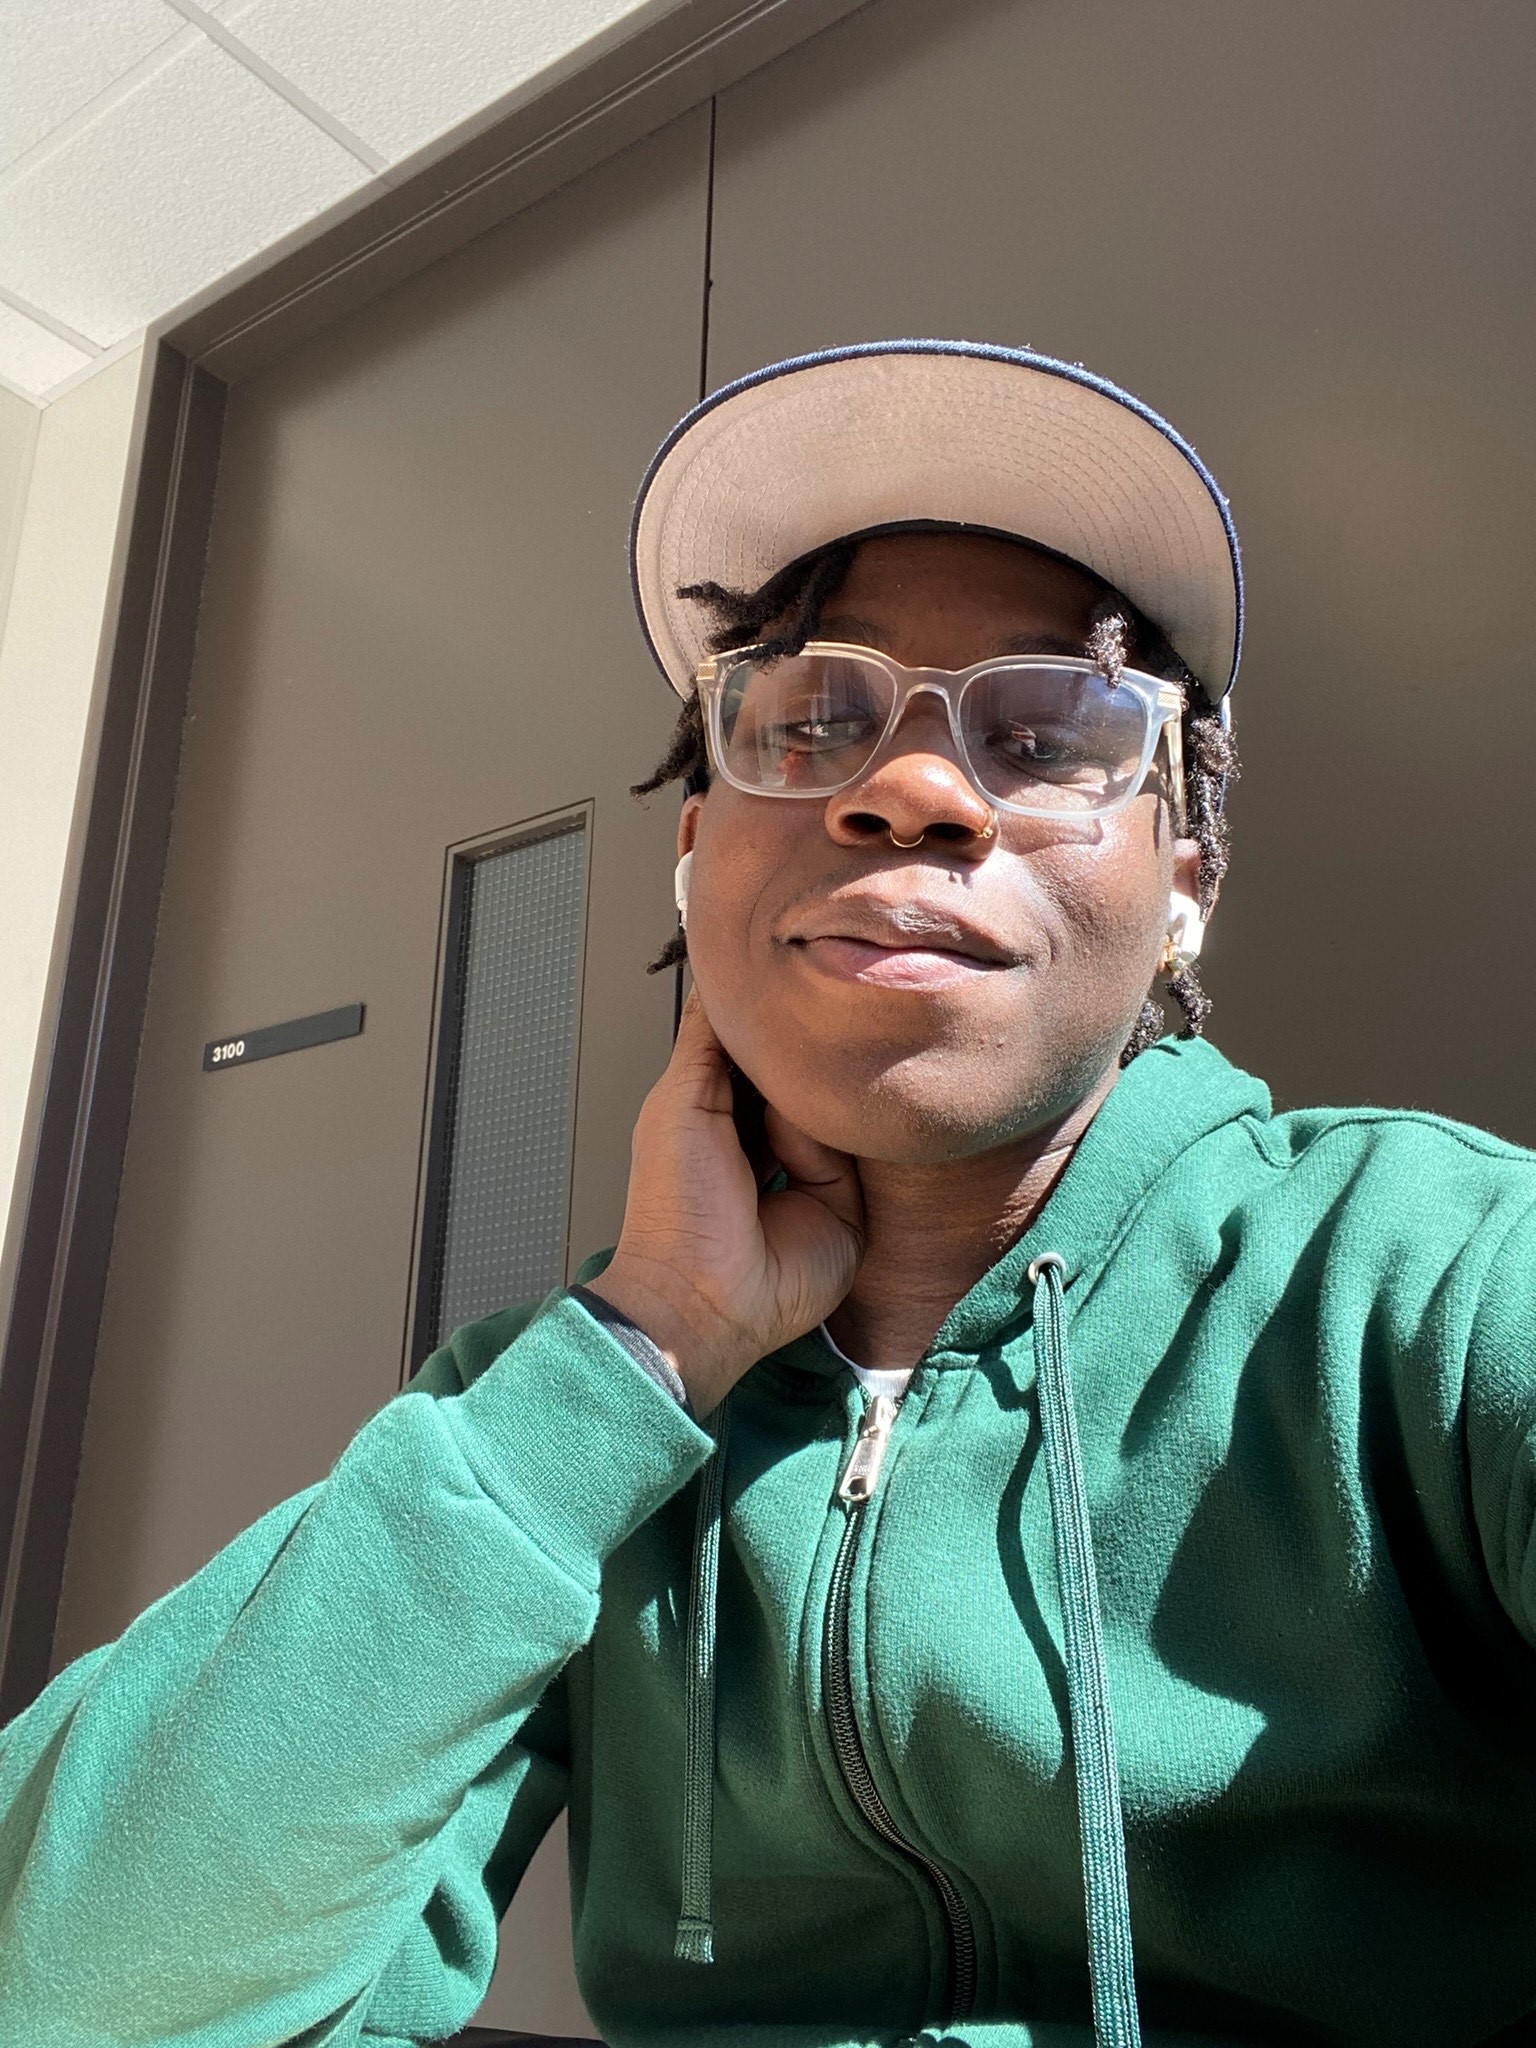 a smiling Black man with nose rings and glasses in a baseball cap and green sweatshirt